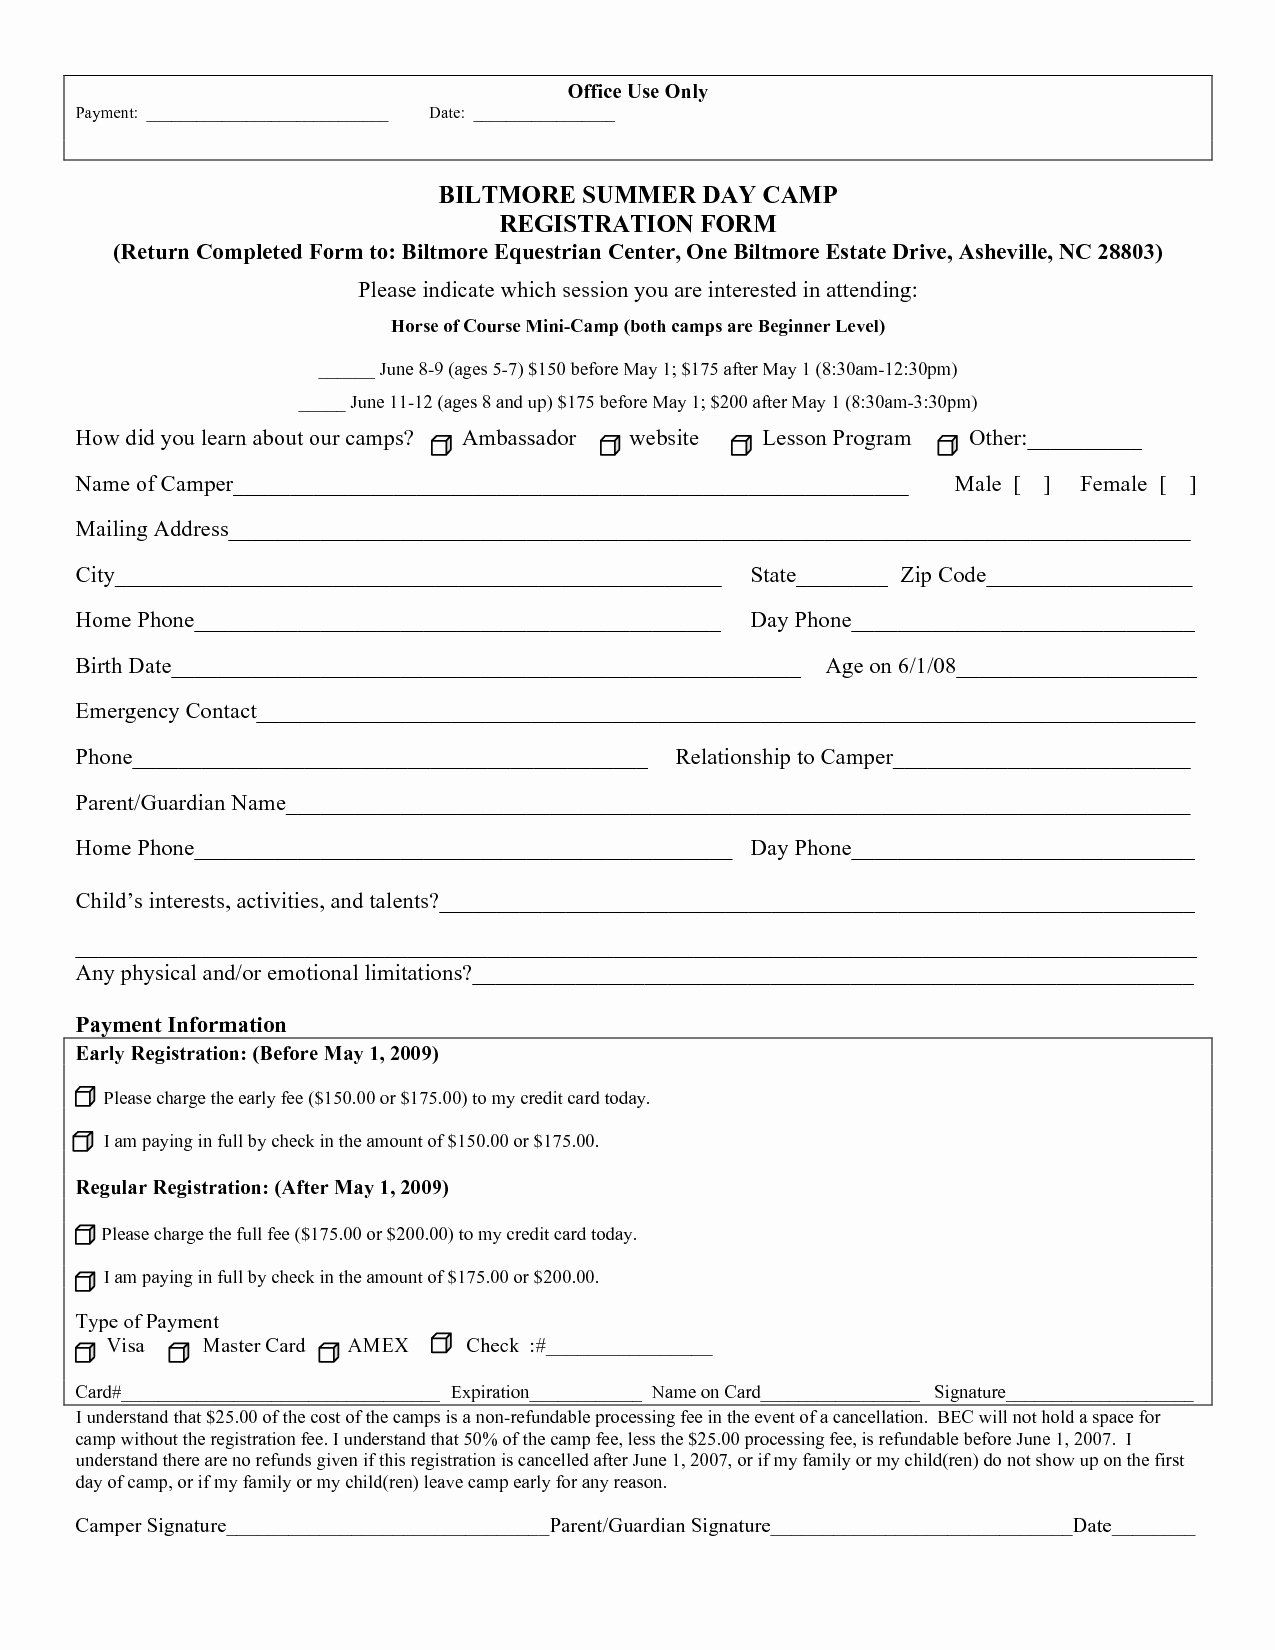 Free Sports Registration form Template Awesome Groups Proposal C666d Best form Template